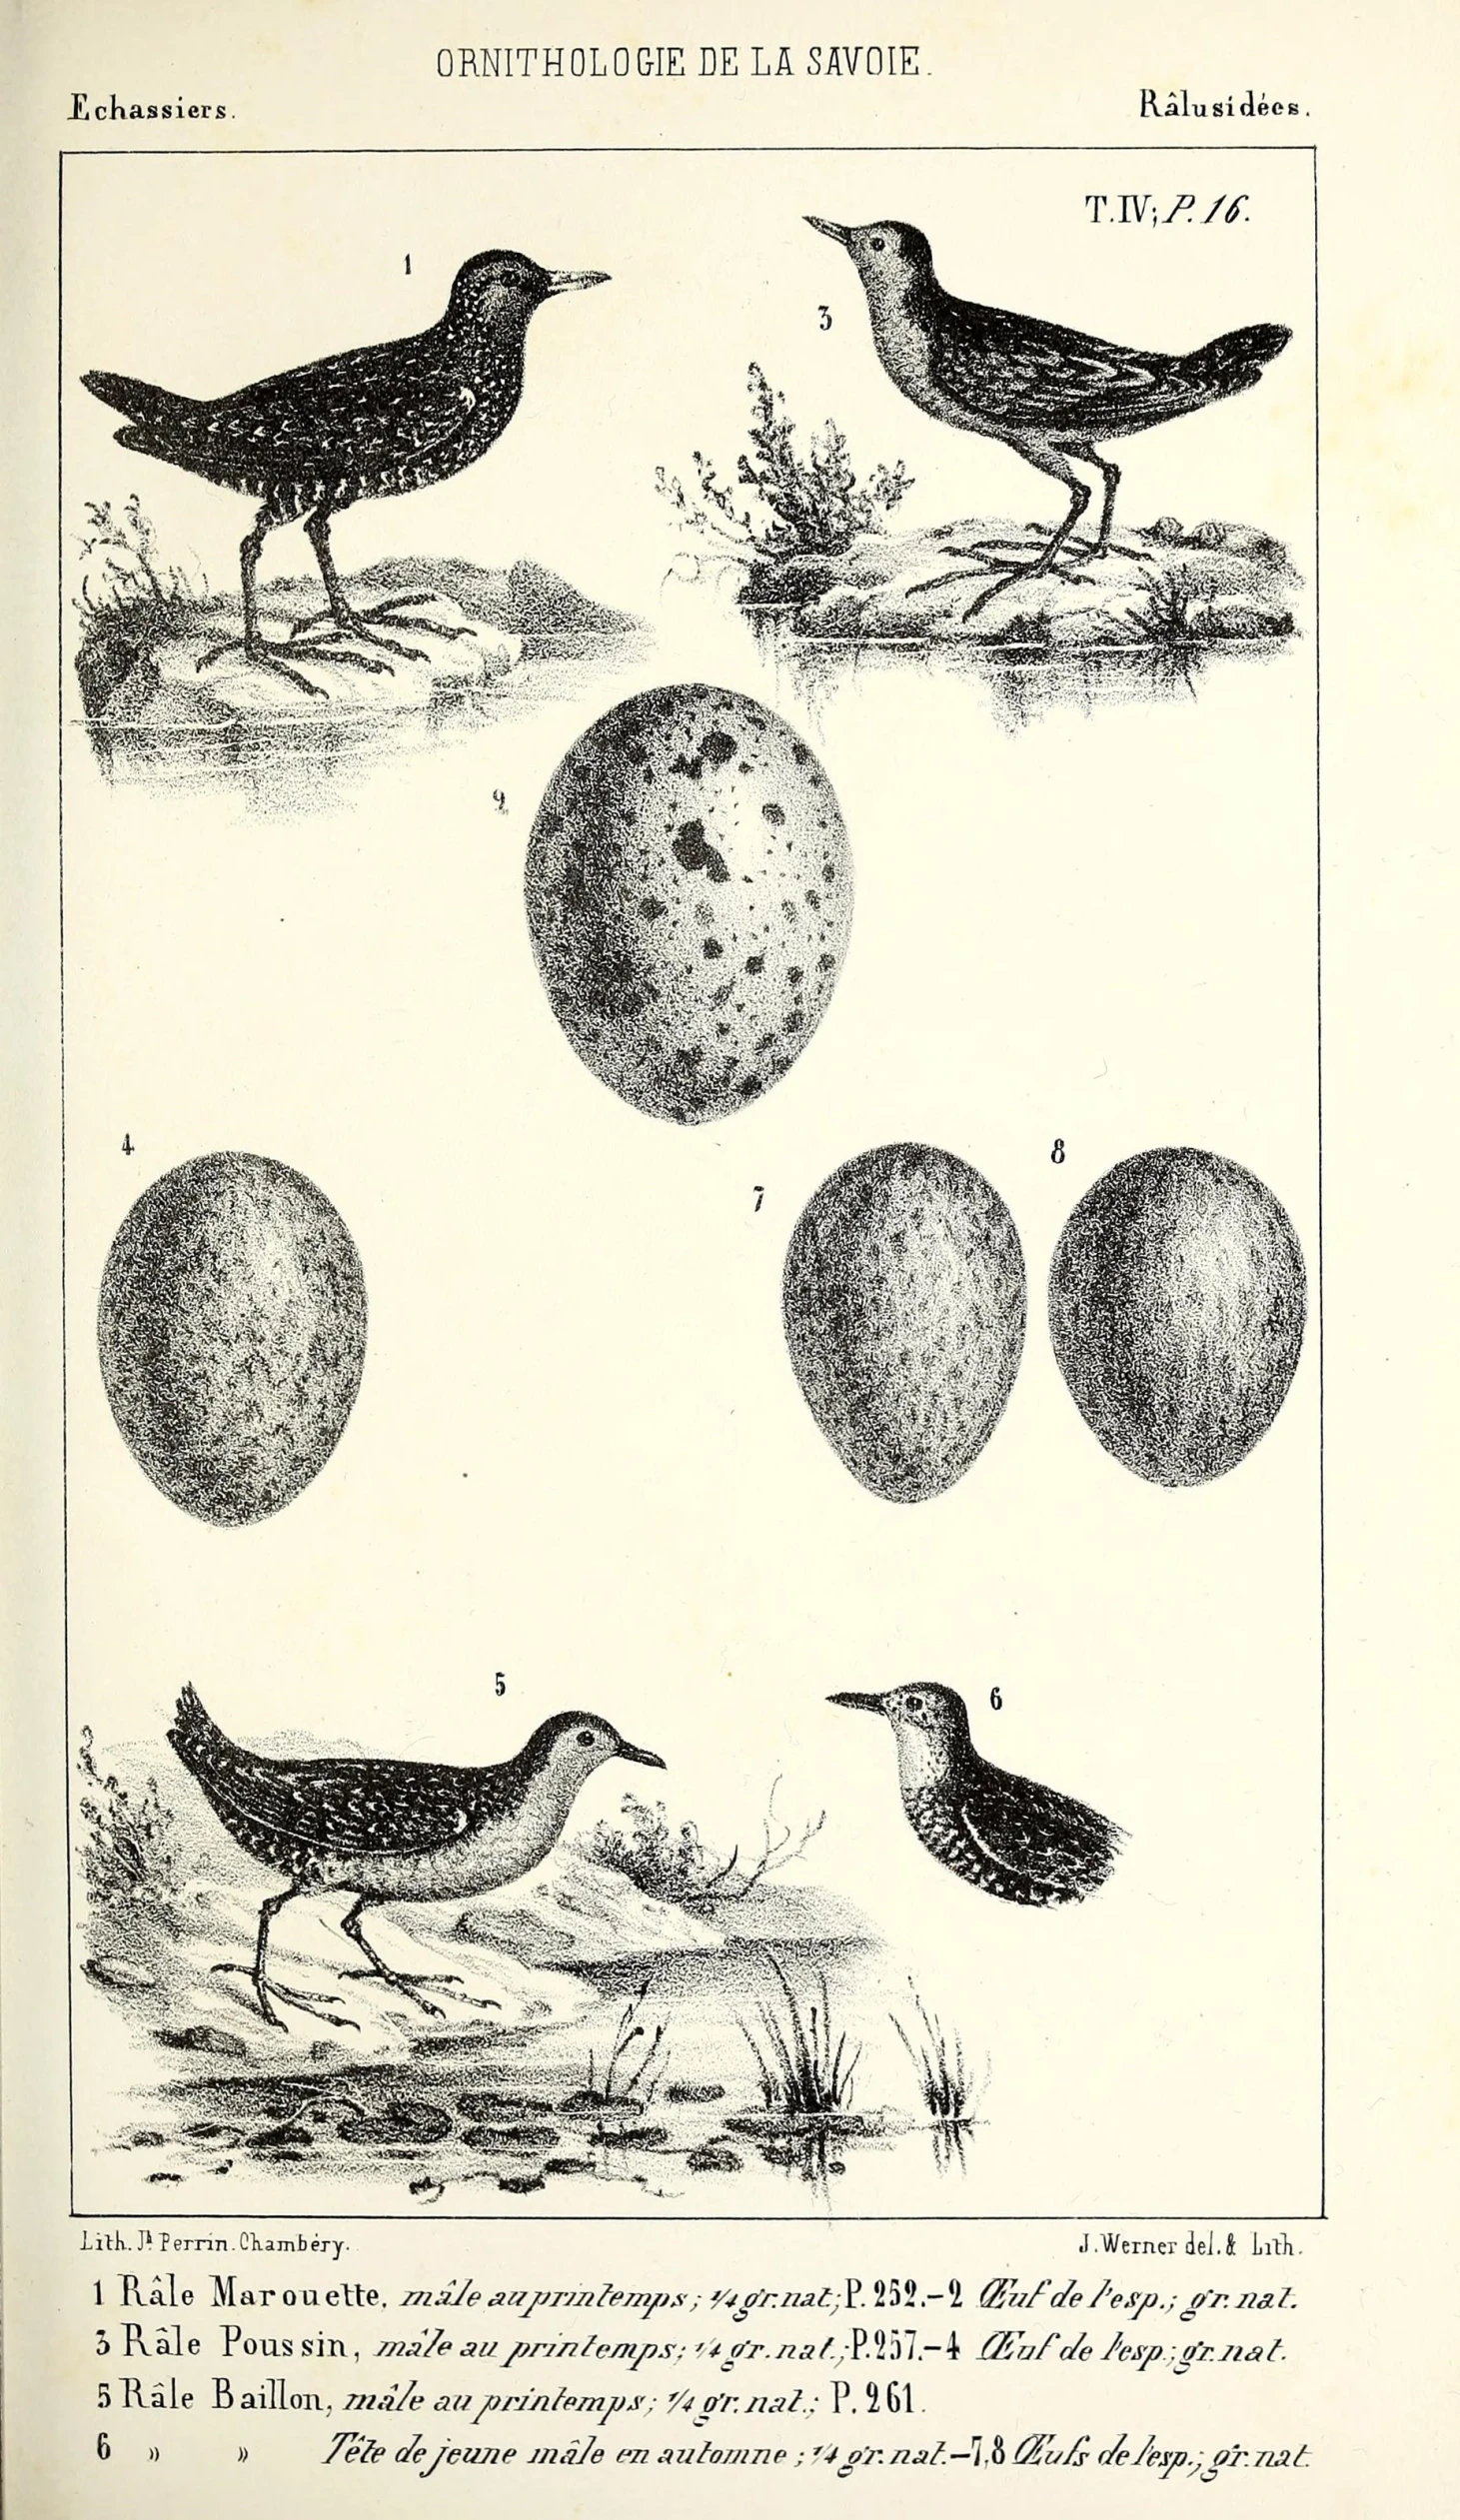 birds and spheres on a page in a book